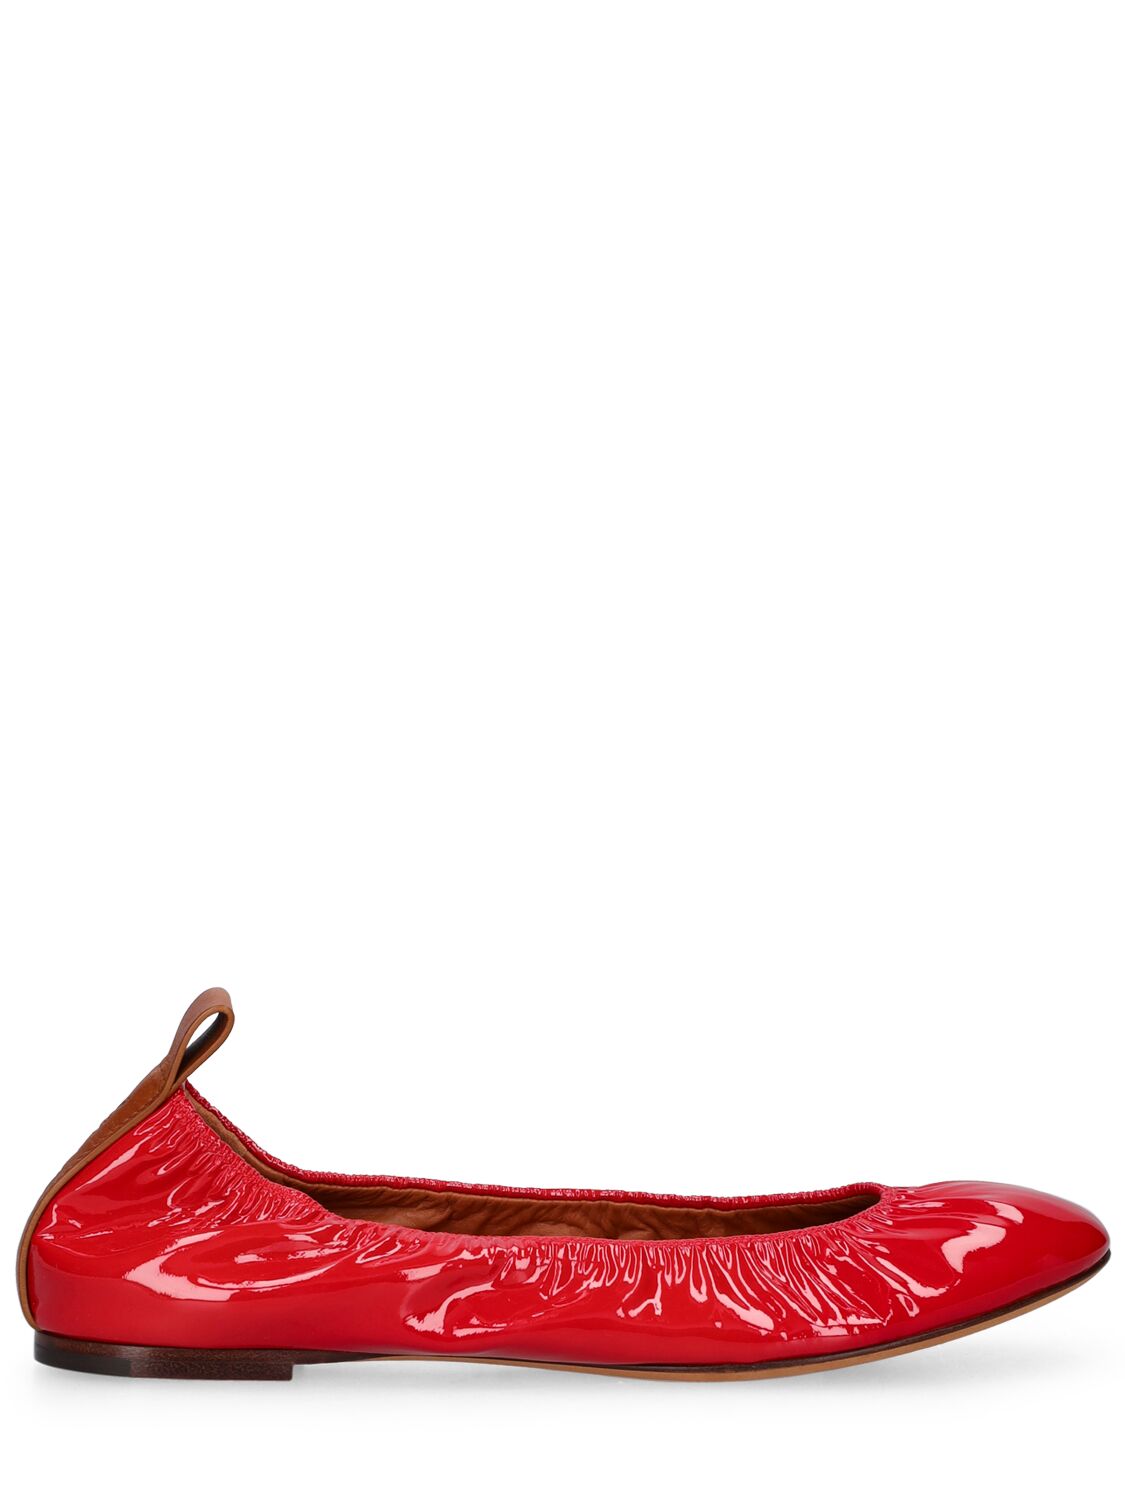 Image of Patent Leather Ballerina Flats